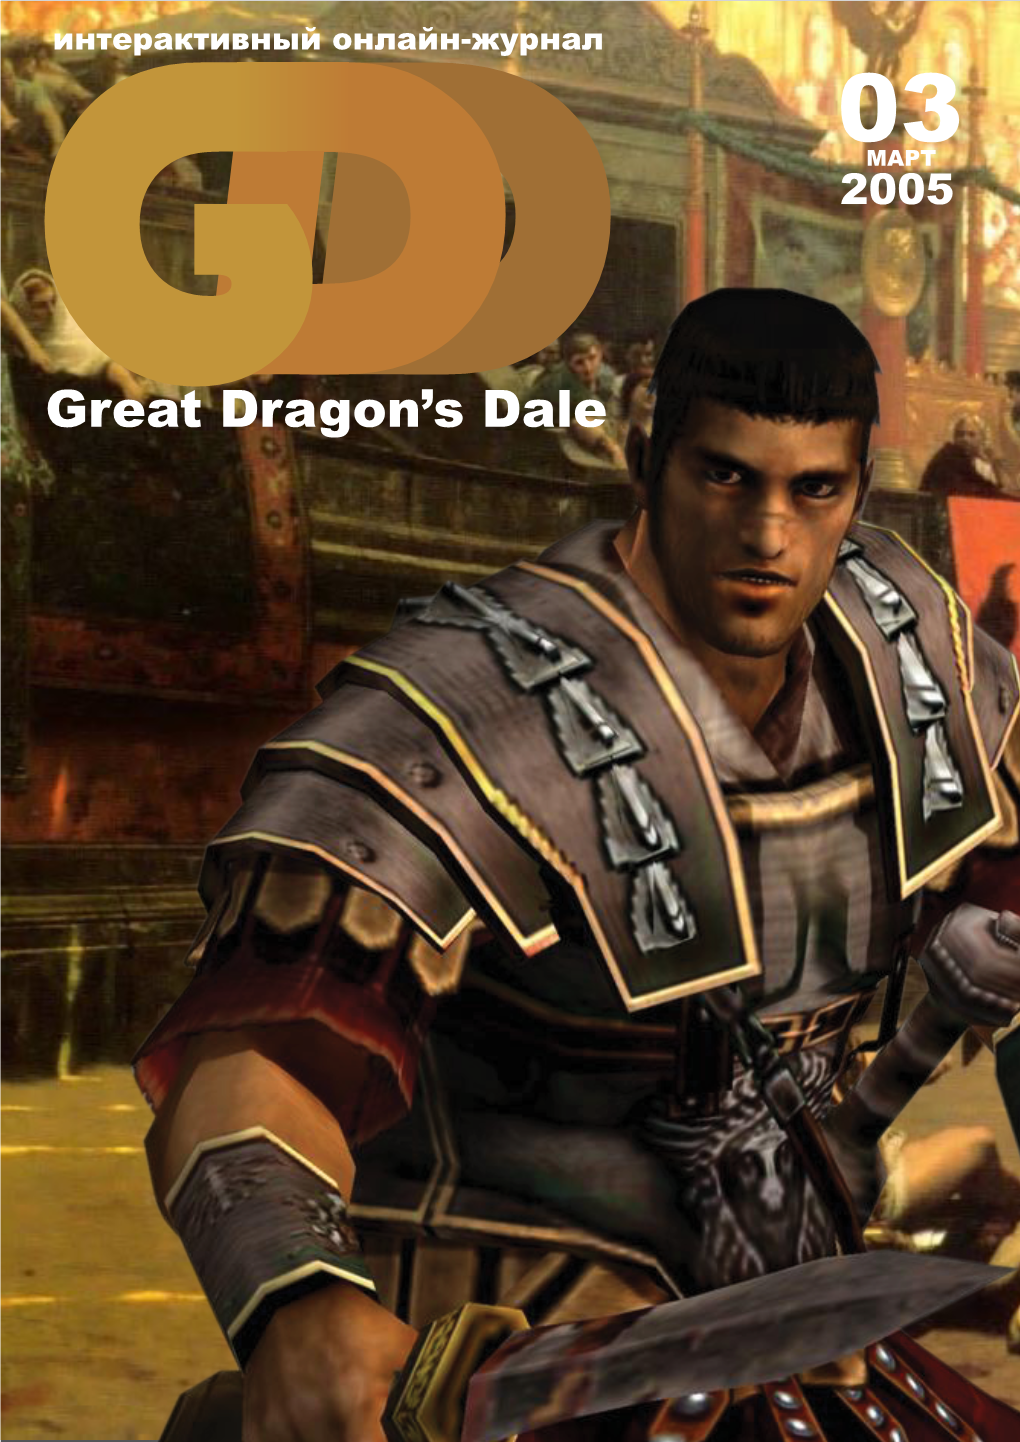 Great Dragon's Dale